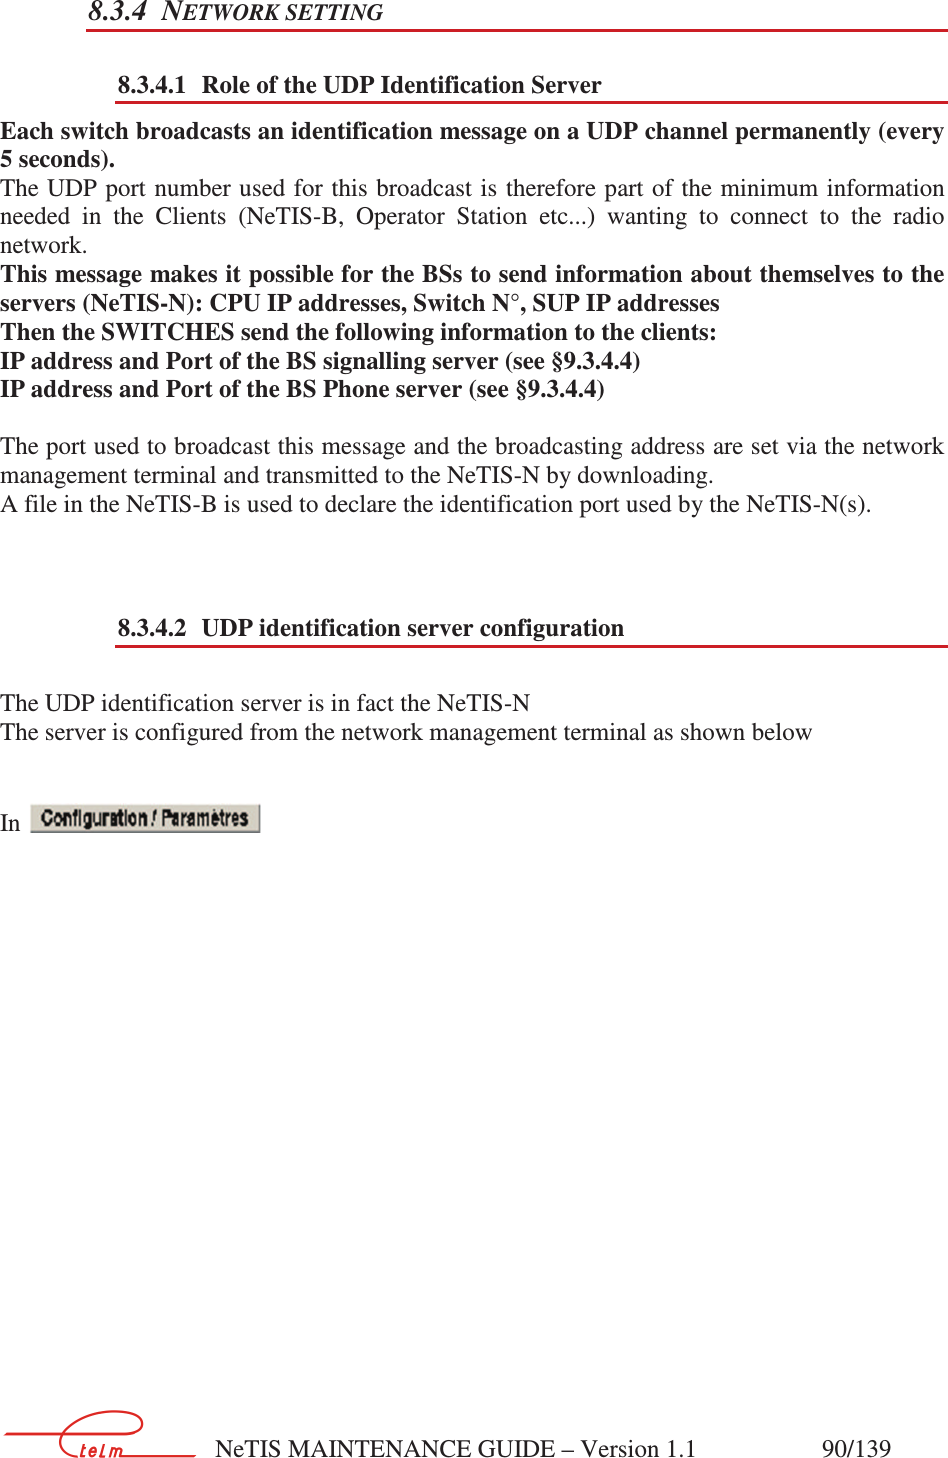        NeTIS MAINTENANCE GUIDE – Version 1.1                    90/139   8.3.4 NETWORK SETTING 8.3.4.1 Role of the UDP Identification Server Each switch broadcasts an identification message on a UDP channel permanently (every 5 seconds).  The UDP port number used for this broadcast is therefore part of the minimum information needed  in  the  Clients  (NeTIS-B,  Operator  Station  etc...)  wanting  to  connect  to  the  radio network. This message makes it possible for the BSs to send information about themselves to the servers (NeTIS-N): CPU IP addresses, Switch N°, SUP IP addresses Then the SWITCHES send the following information to the clients: IP address and Port of the BS signalling server (see §9.3.4.4) IP address and Port of the BS Phone server (see §9.3.4.4)  The port used to broadcast this message and the broadcasting address are set via the network management terminal and transmitted to the NeTIS-N by downloading. A file in the NeTIS-B is used to declare the identification port used by the NeTIS-N(s).   8.3.4.2 UDP identification server configuration  The UDP identification server is in fact the NeTIS-N The server is configured from the network management terminal as shown below   In                      